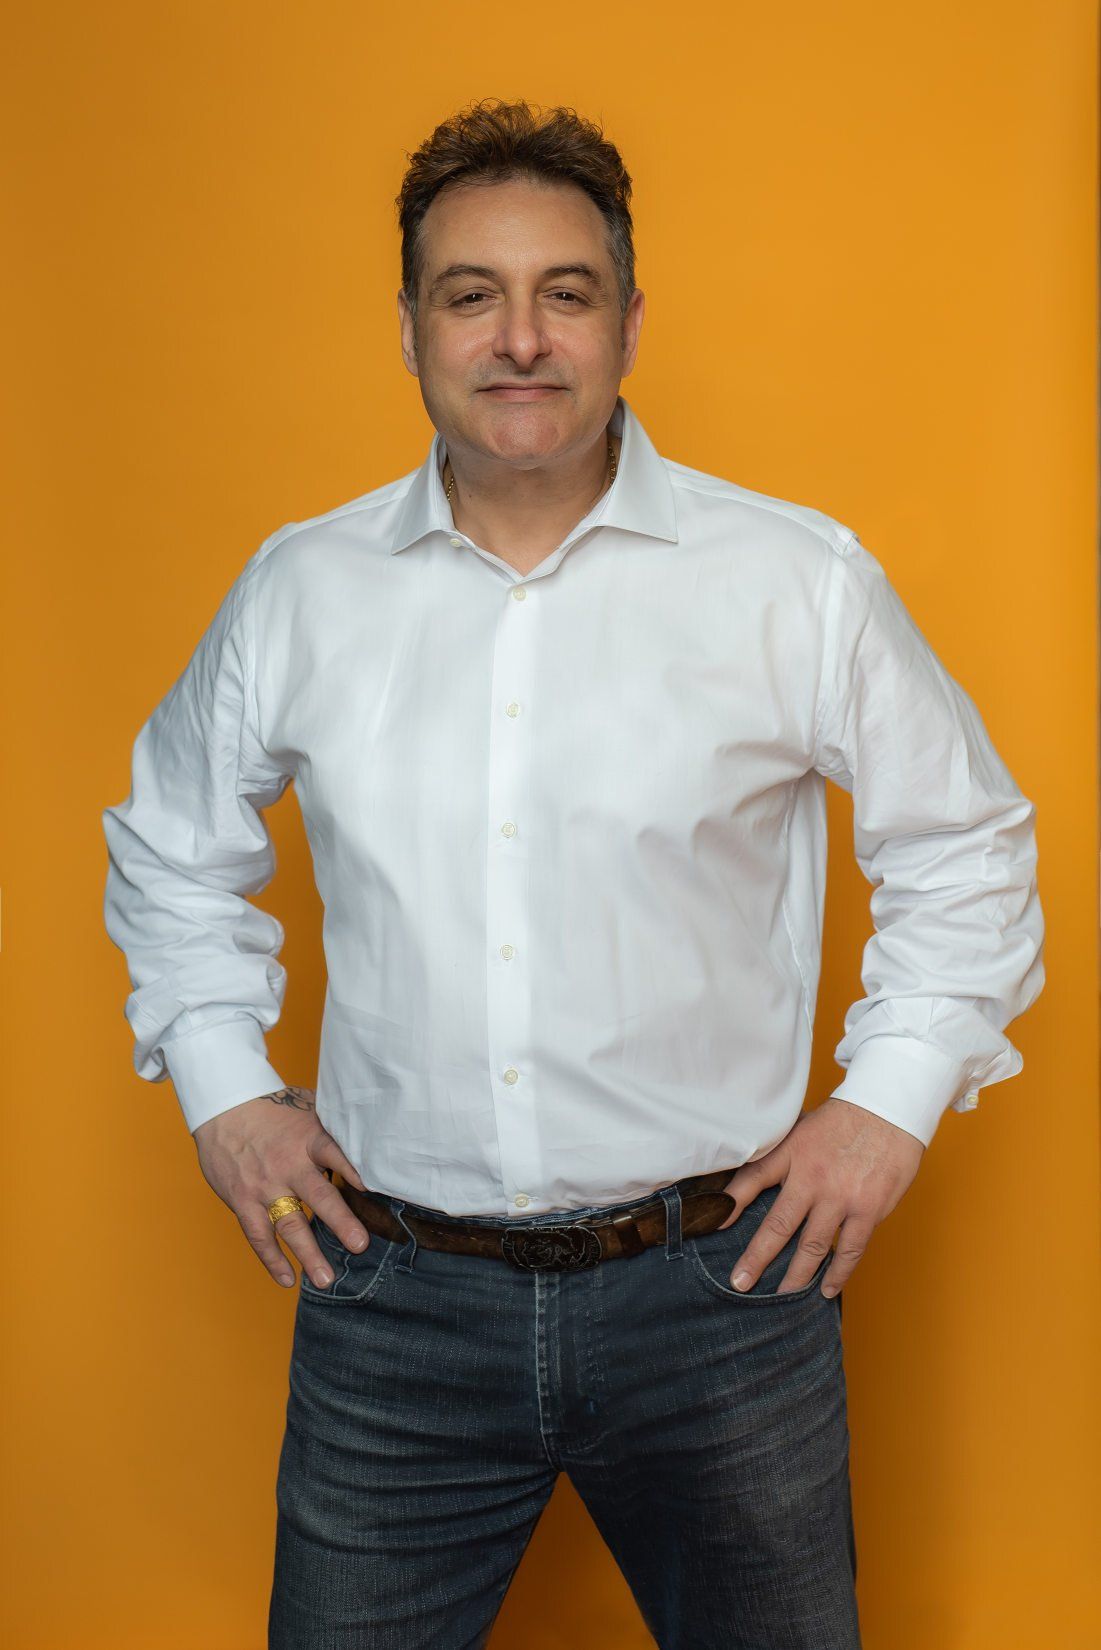 A  business man with hands resting on his waist in LinkedIn headshot photo